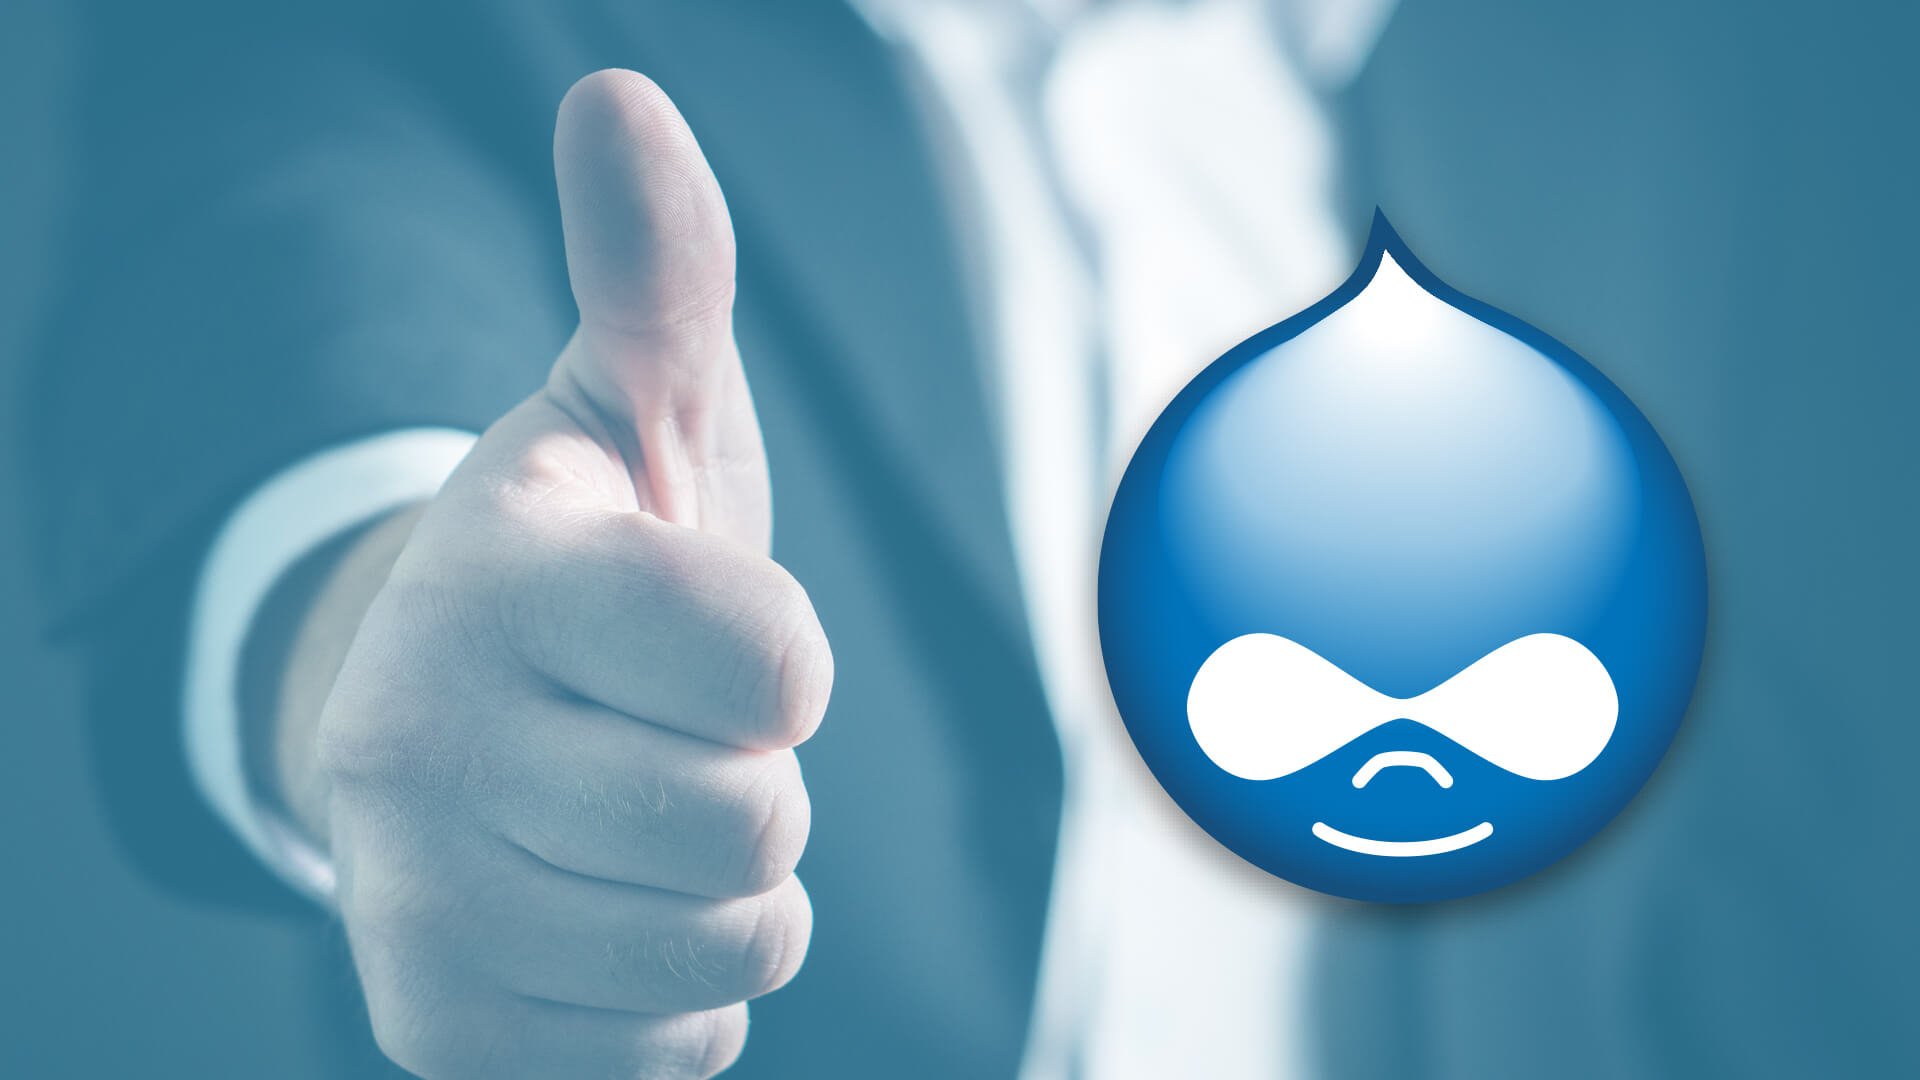 drupal miglior cms php open source